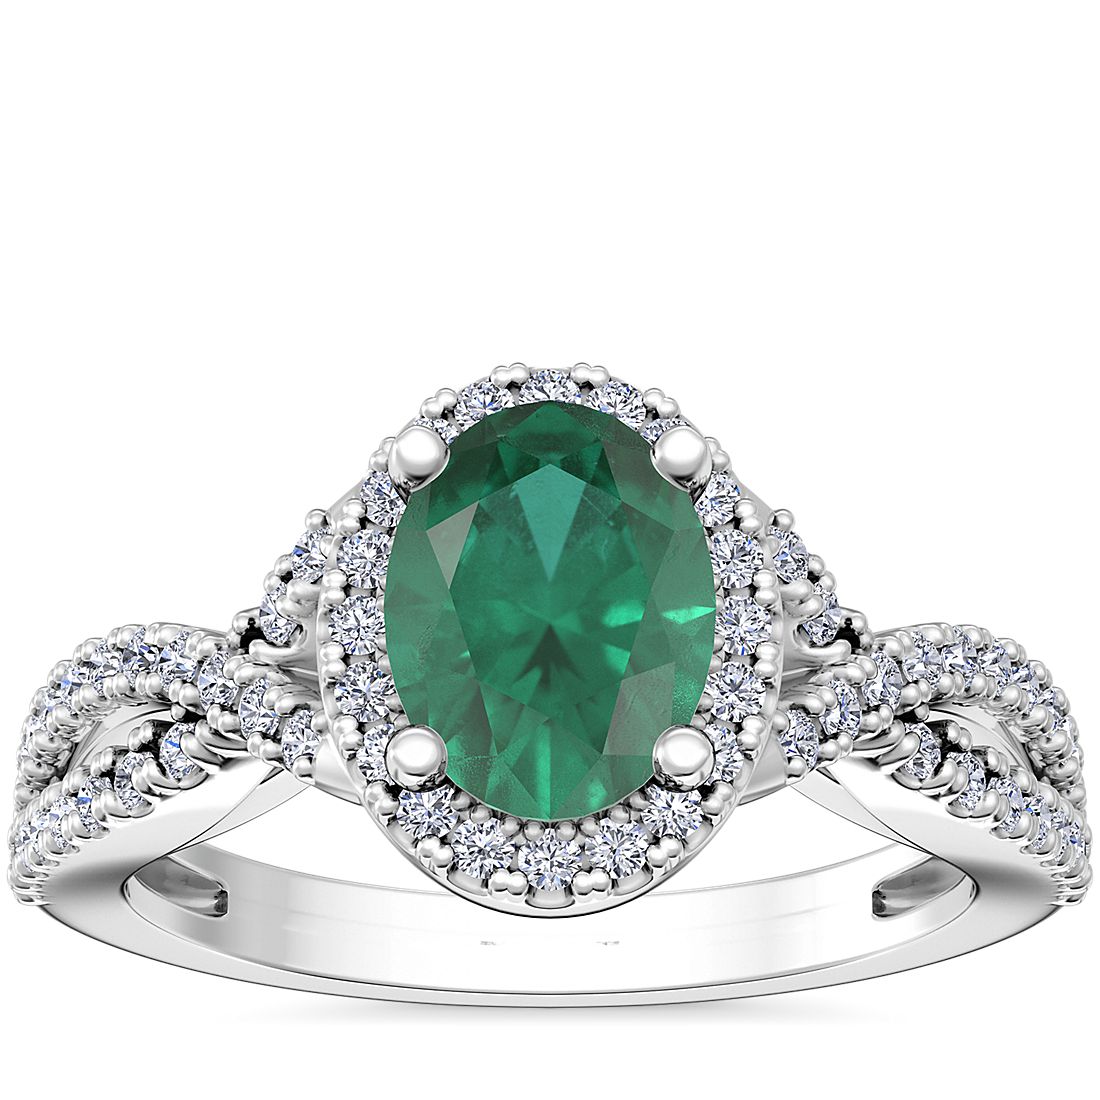 Details about   14k White Gold Oval Emerald And Diamond Ring